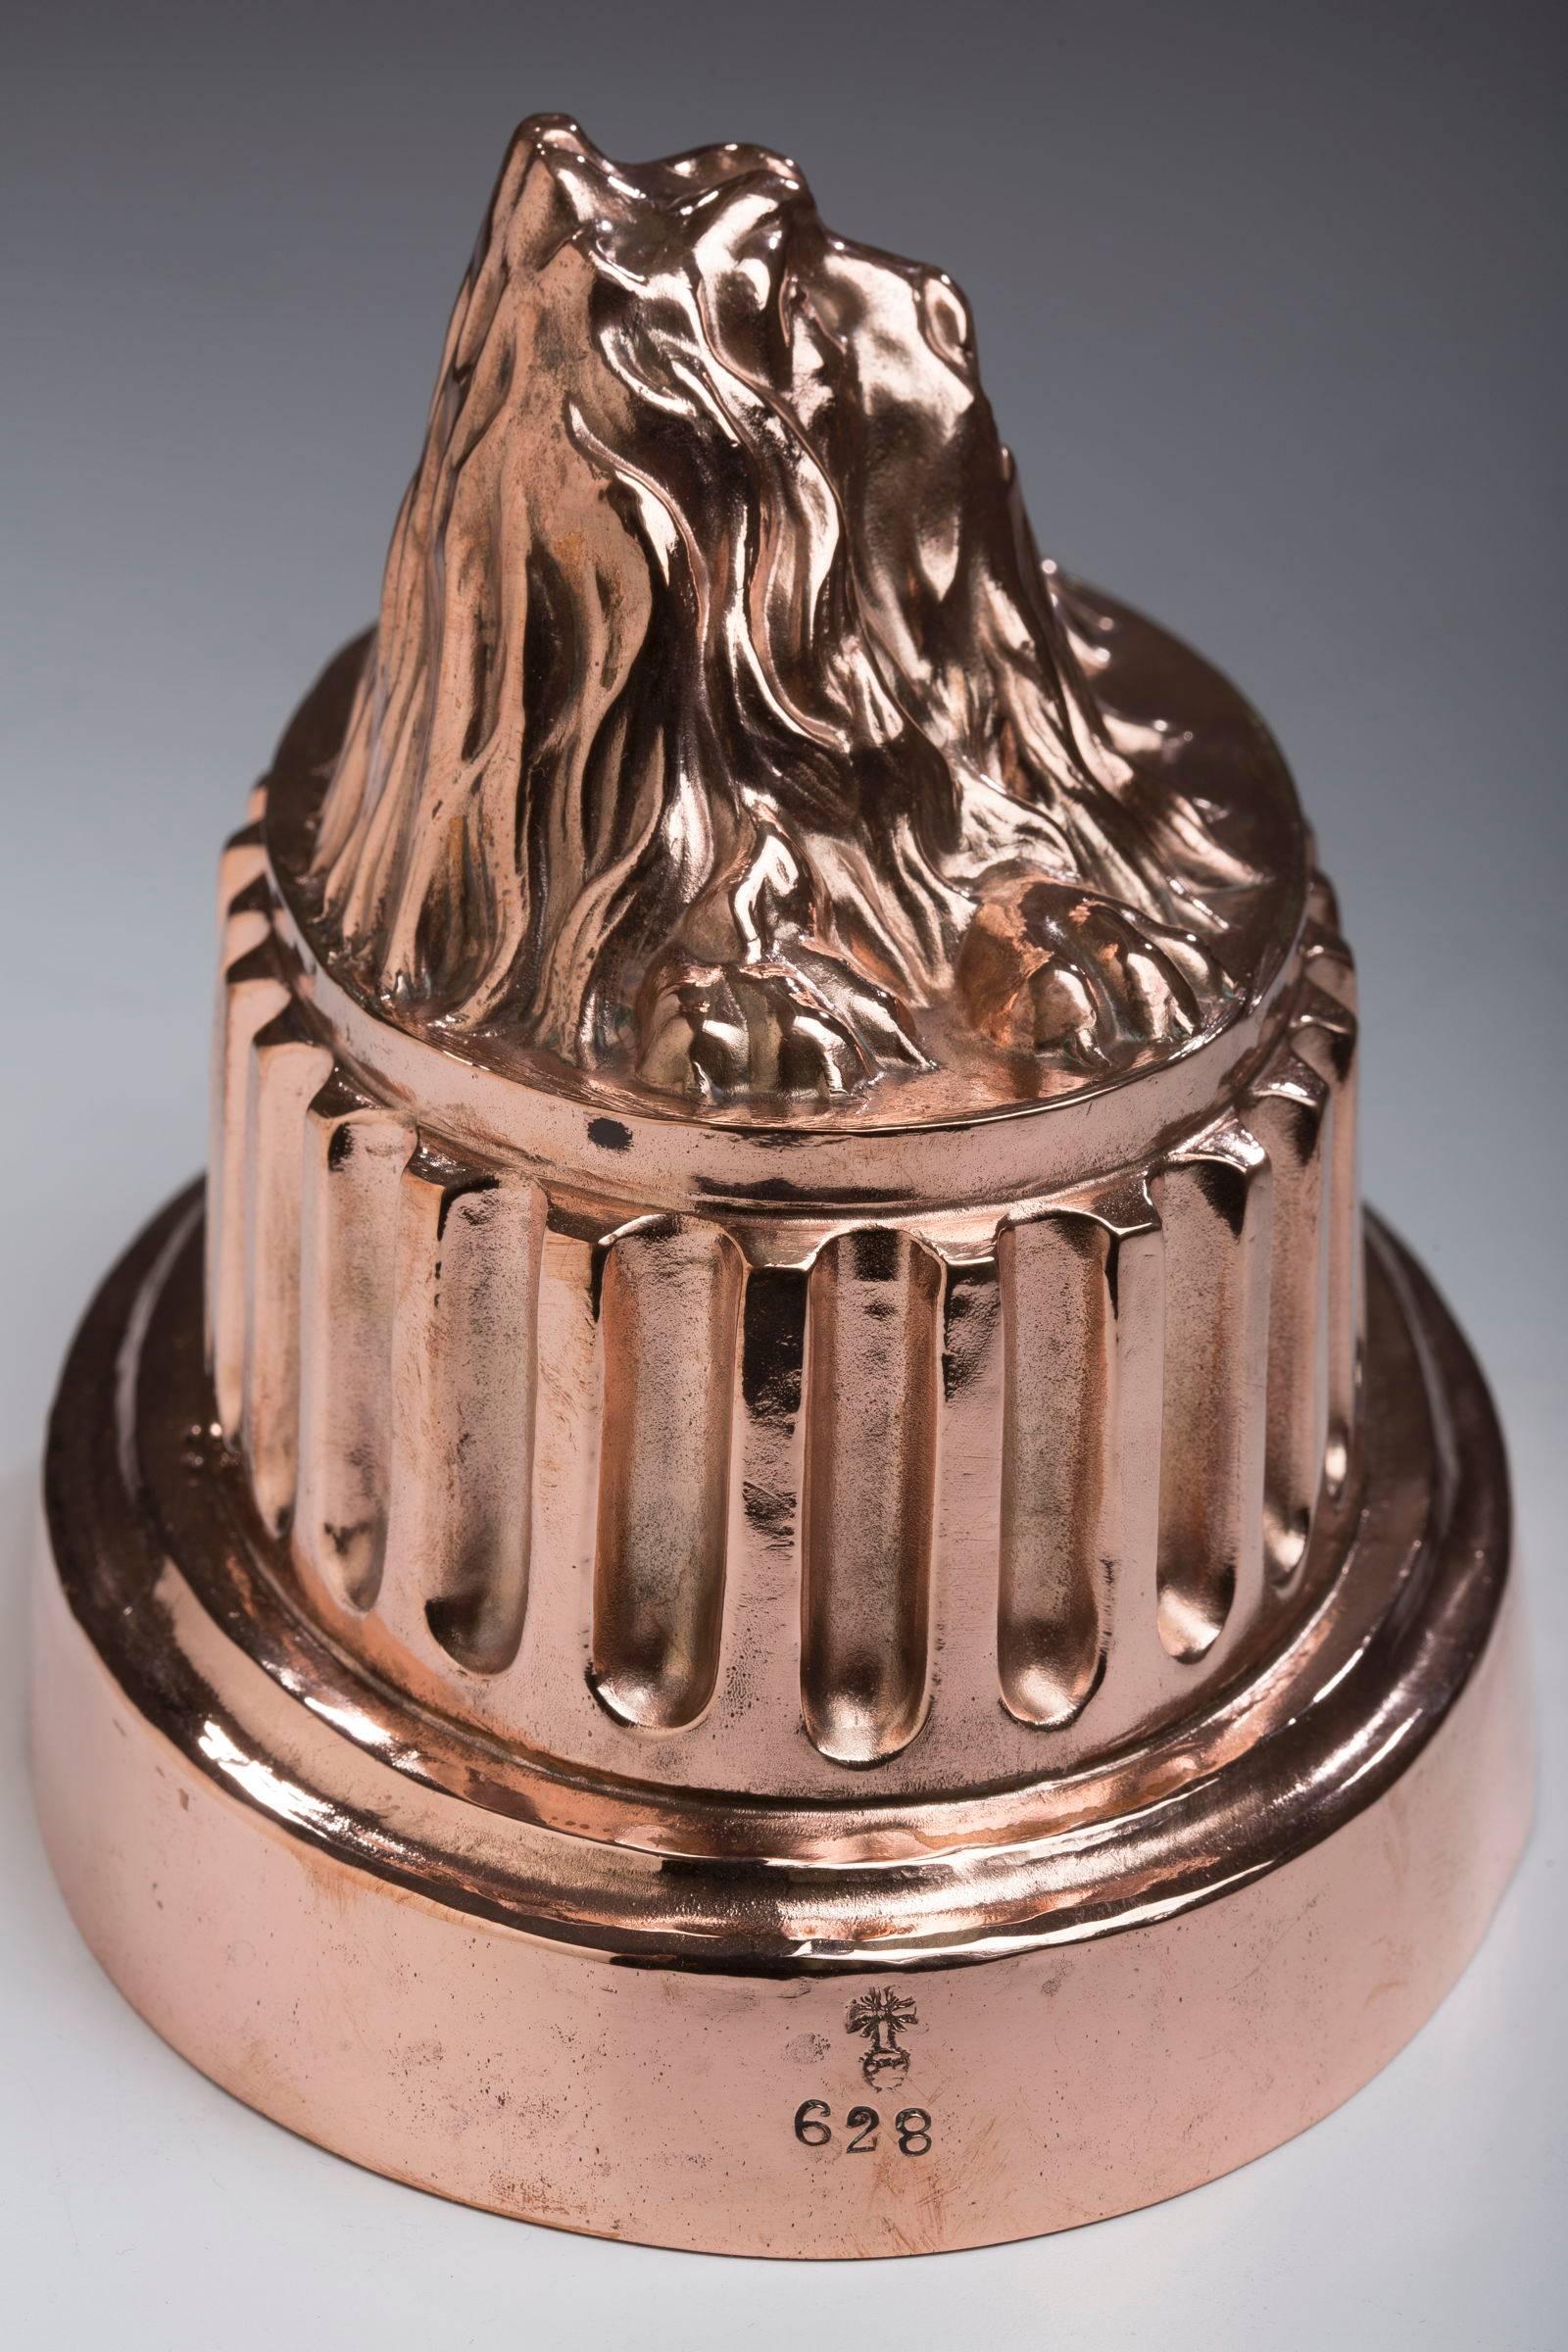 English, copper oval figural mould of a lion on top of a fluted base.

Benham marked 628. Measures: 7.25 ″L, 5.0″ H, circa 1880.

The Barbary lion is a national animal of England. Lion was the nickname of England's medieval warrior rulers with a